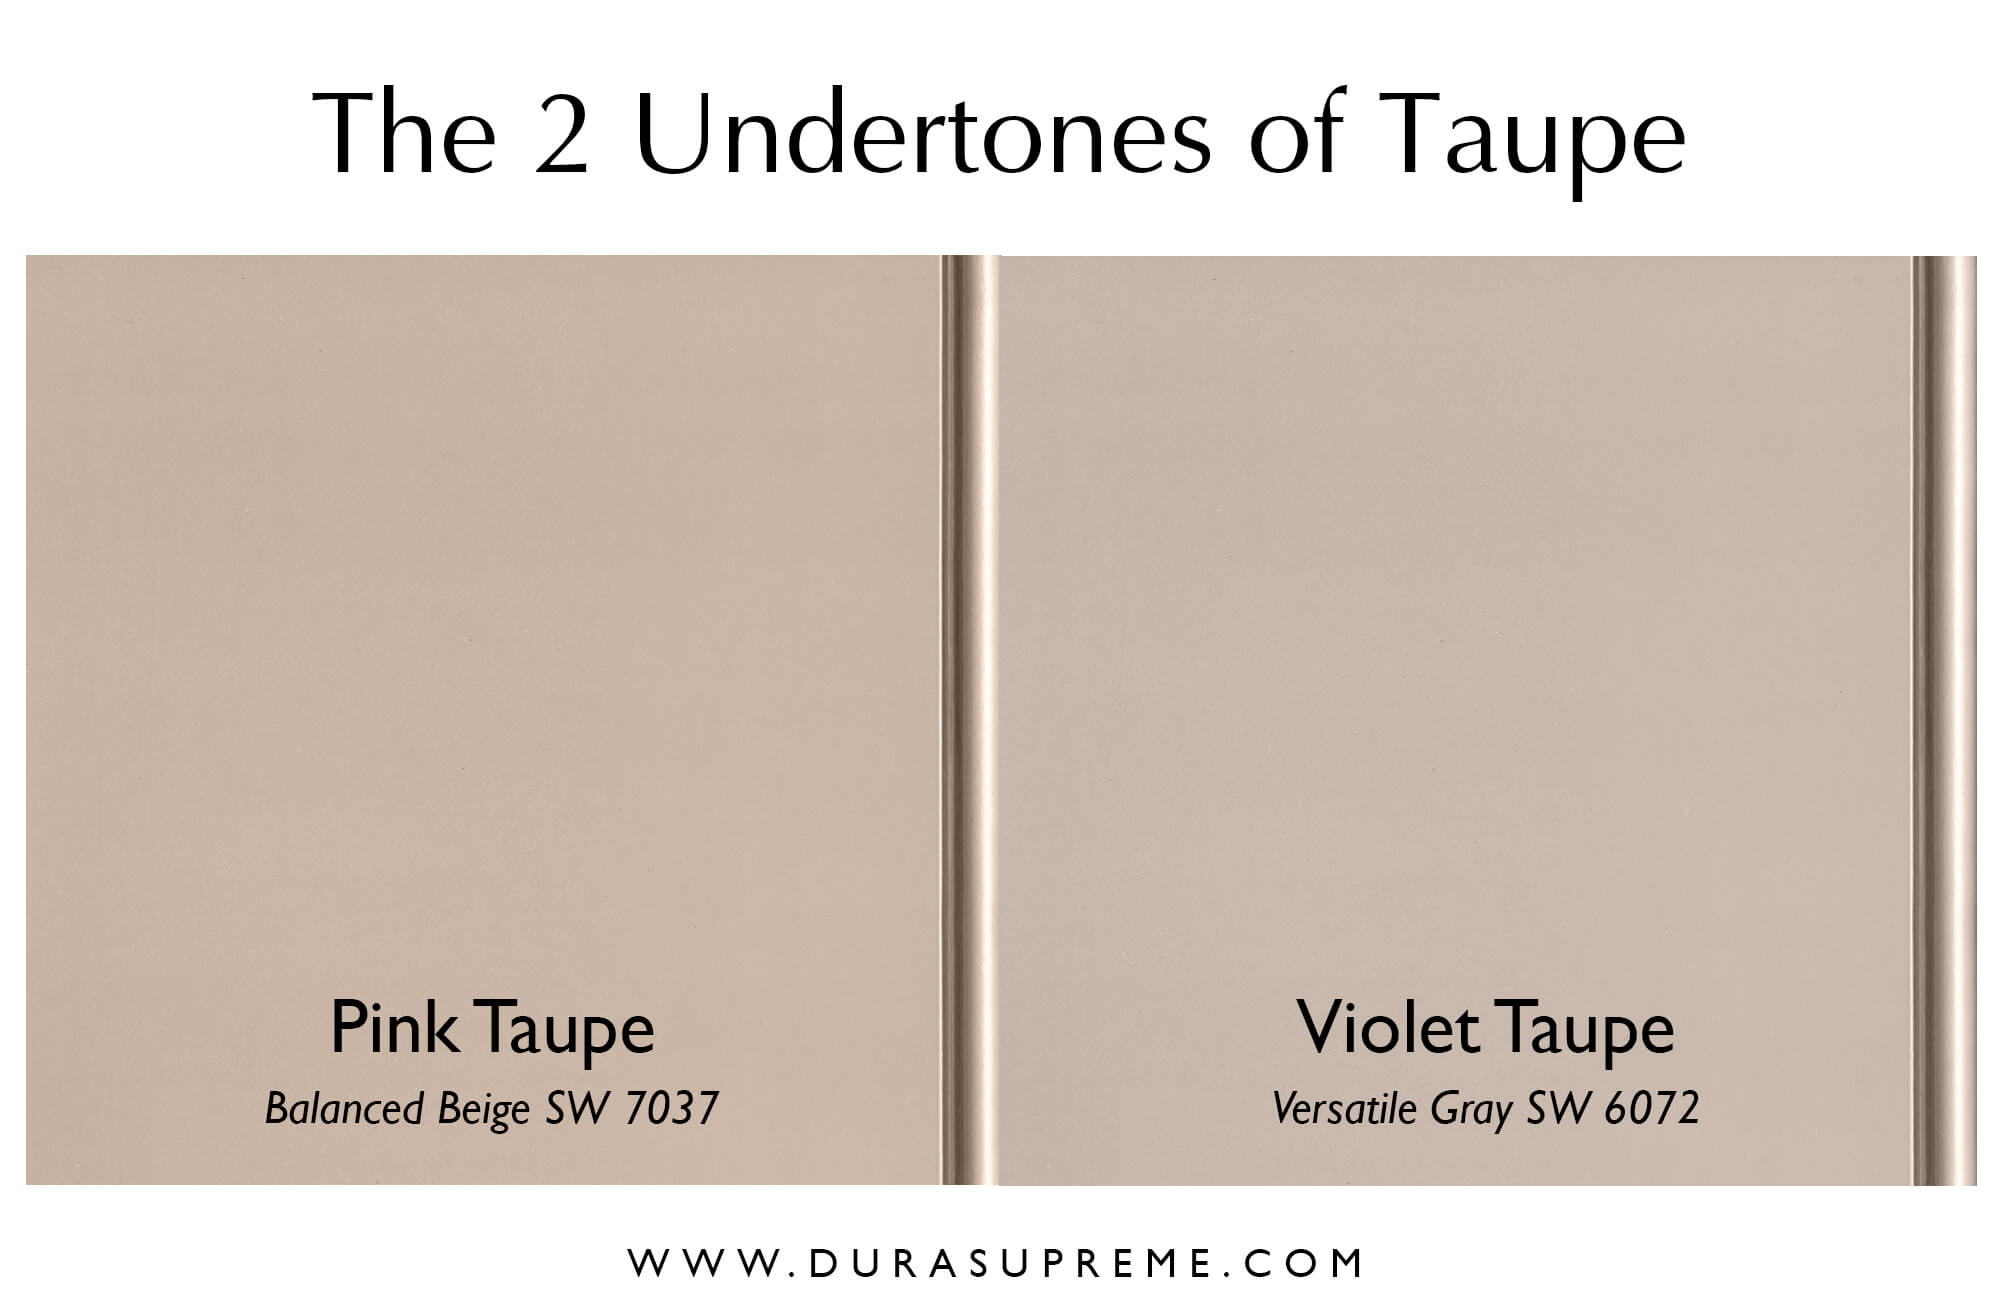 The 2 primary Undertones of the color Taupe, pink-taupe and violet-taupe. Featuring Balanced Beige SW7037 and Versatile Gray SW6072 by Sherwin-Williams.